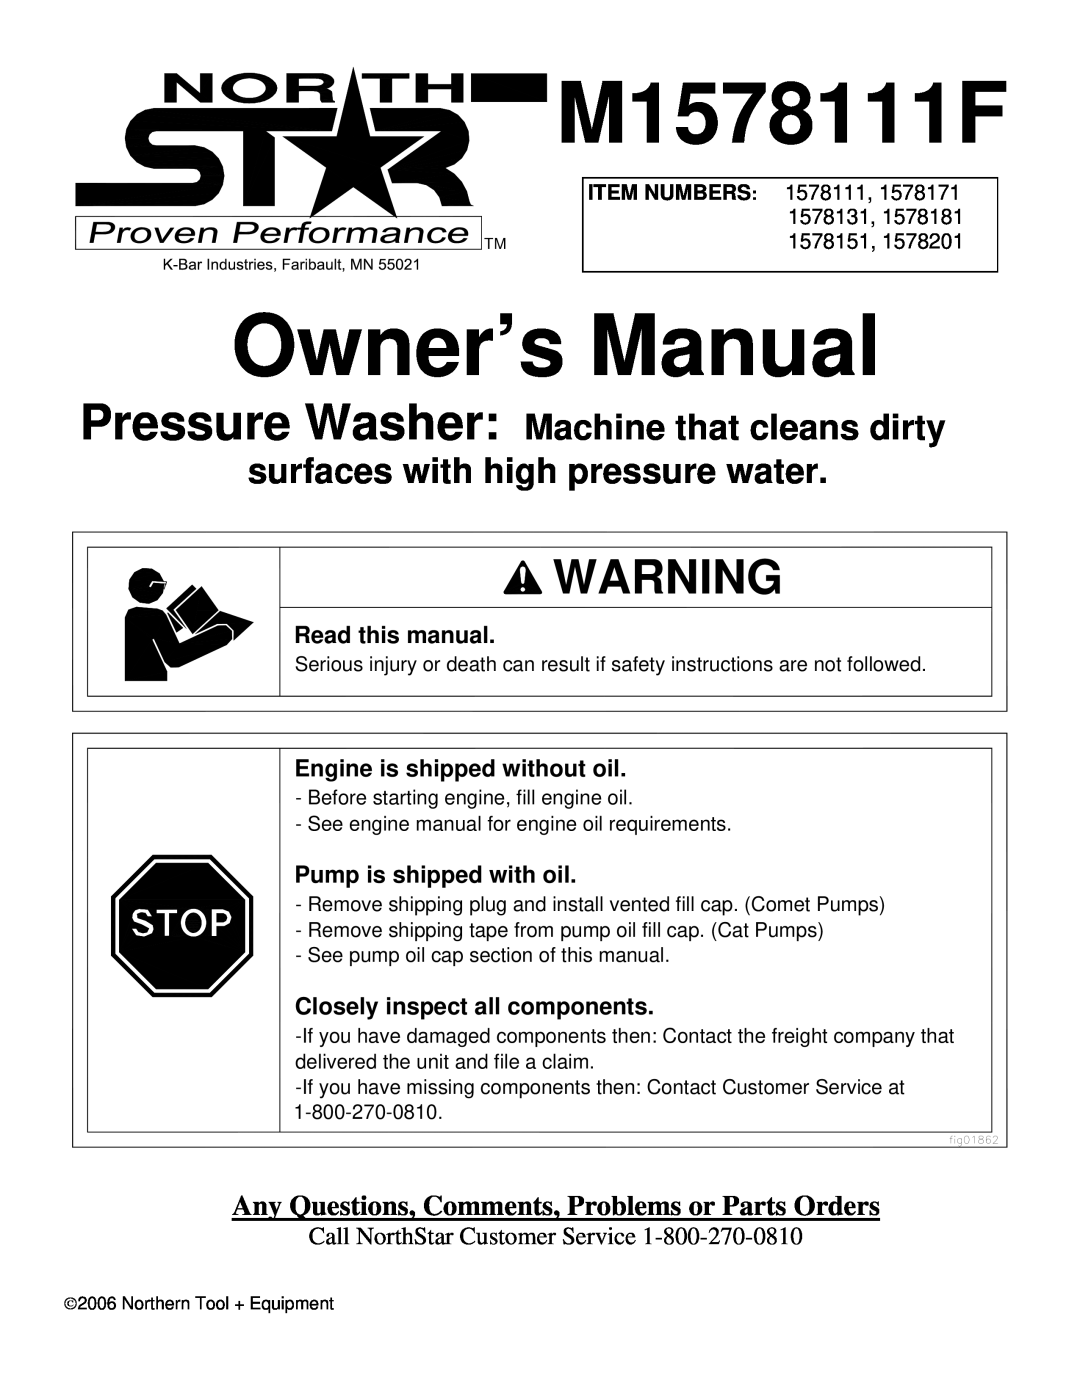 North Star M1578111F owner manual Any Questions, Comments, Problems or Parts Orders, Call NorthStar Customer Service 